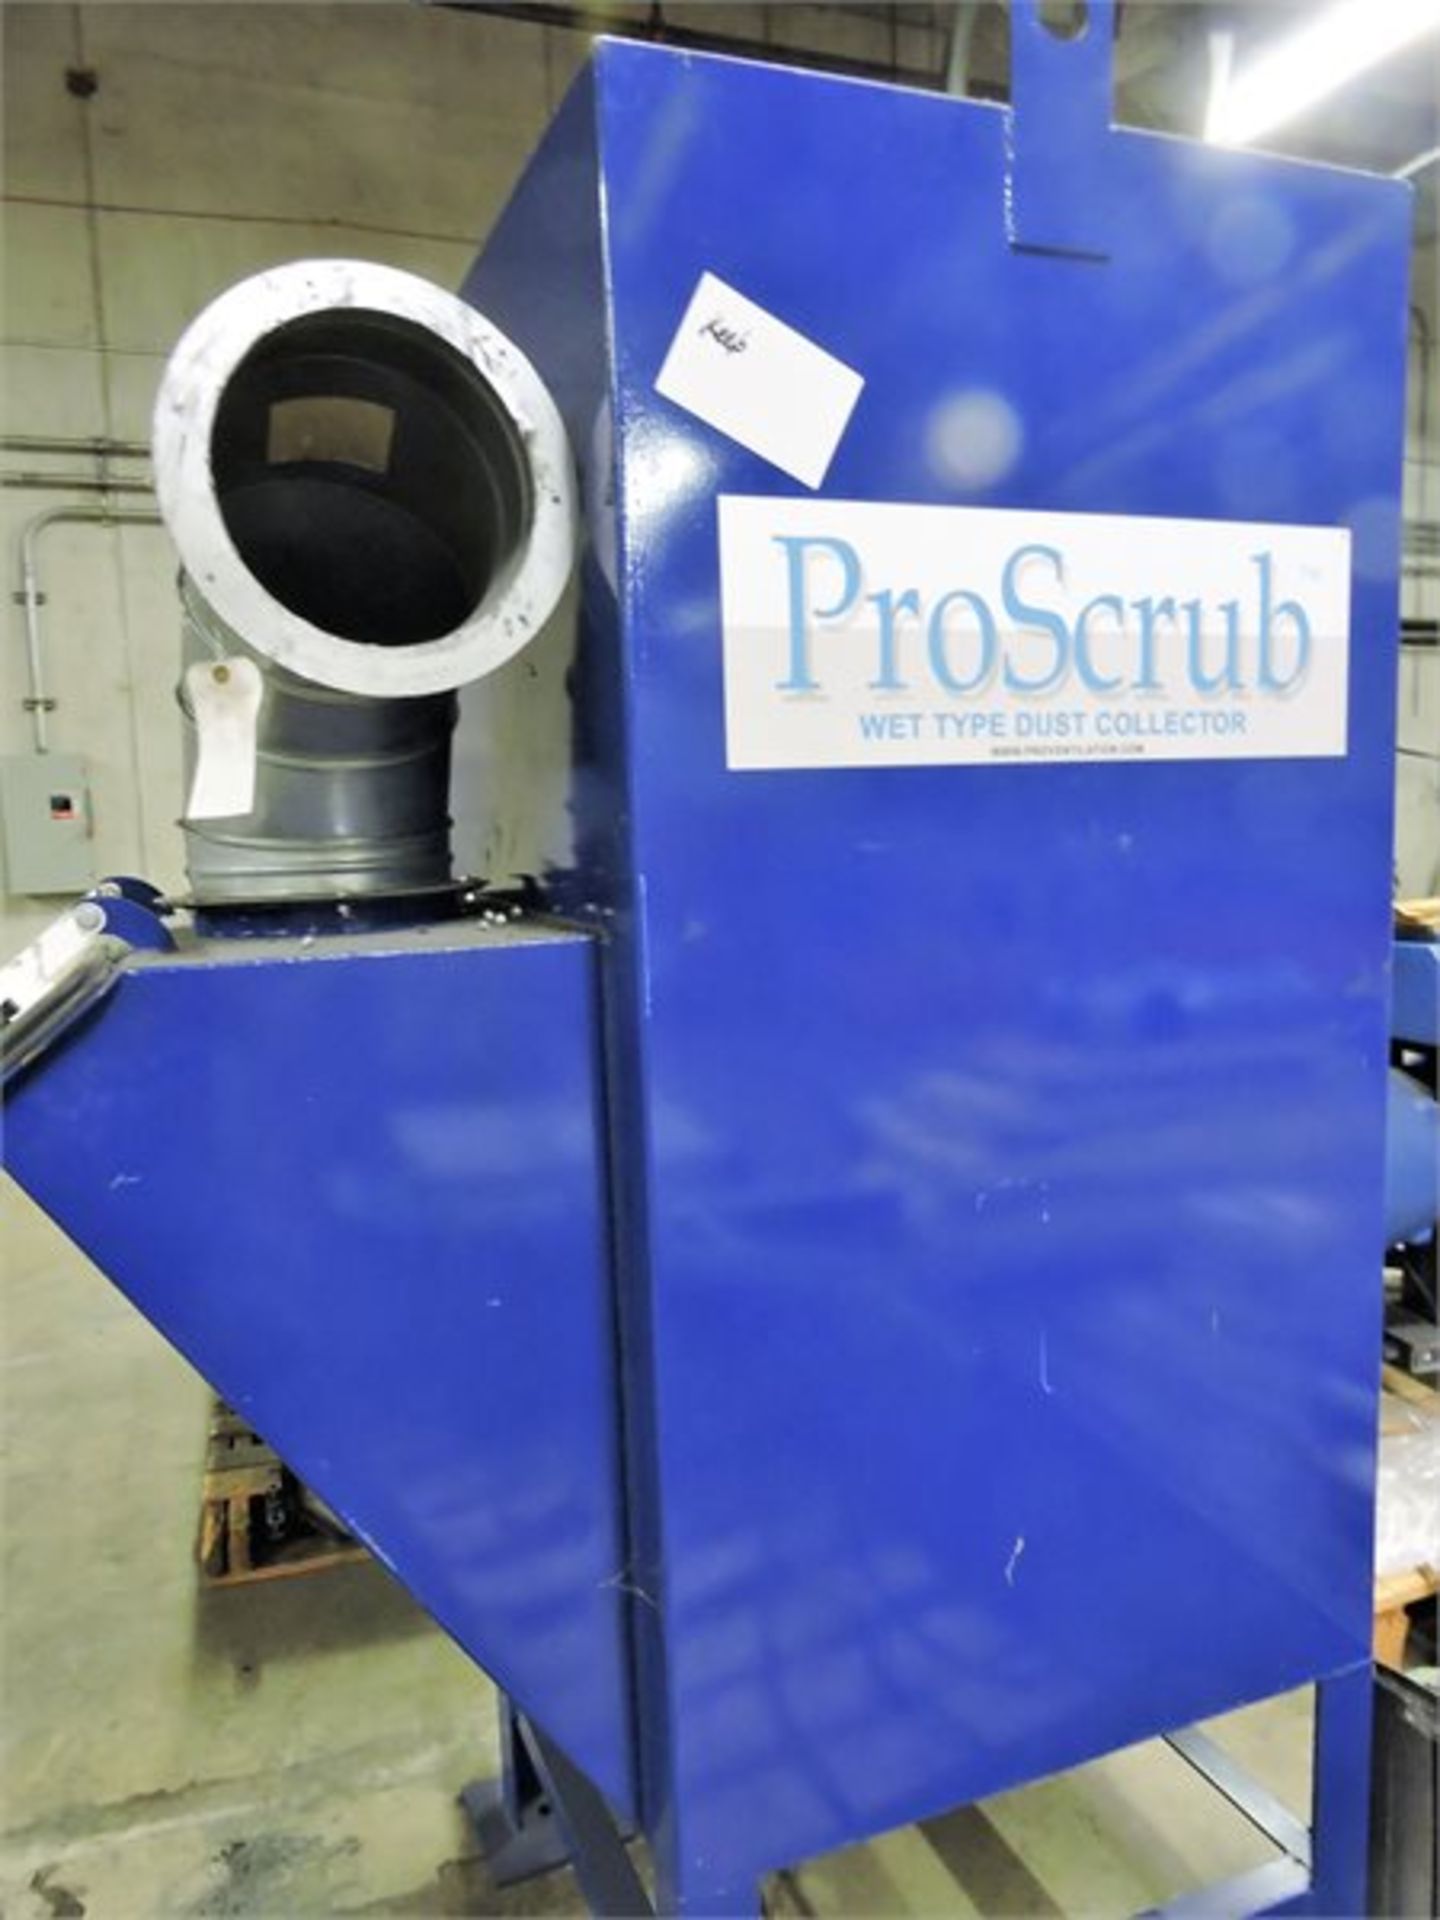 Proscrub Model PS 2500 Wet Dust Collector New (2012) (Miami Lakes, , FL) - Image 2 of 8